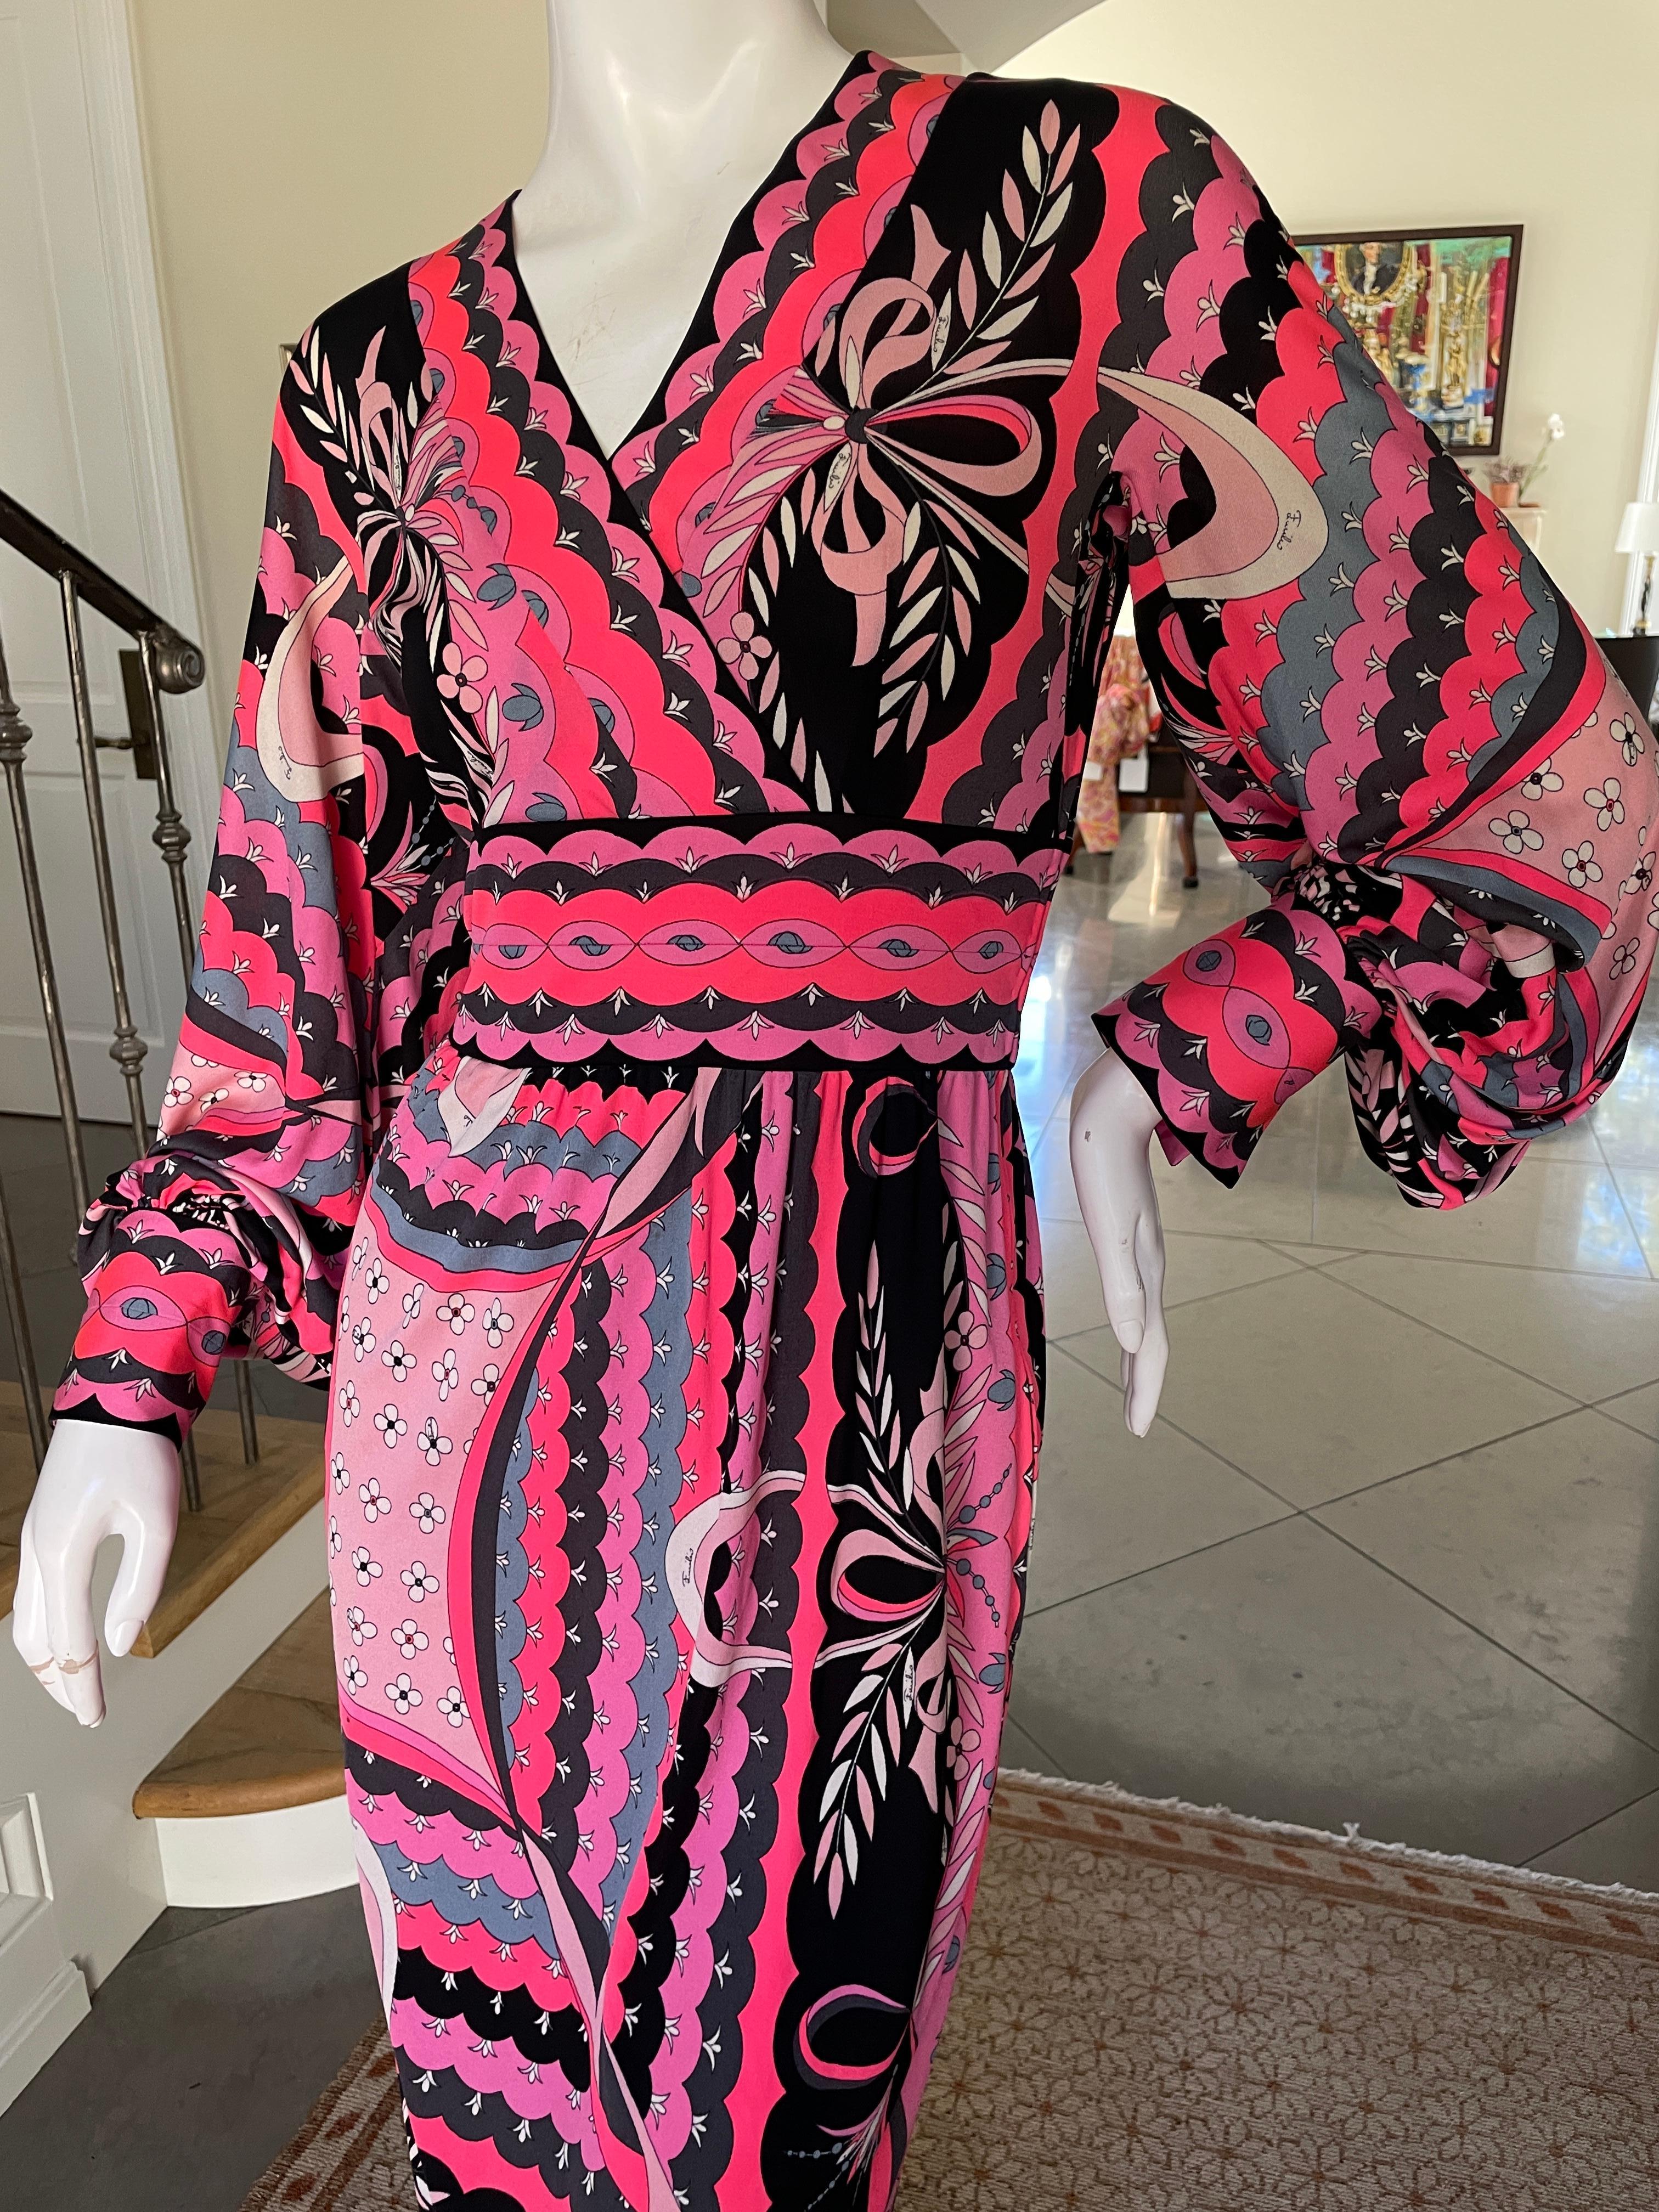 Women's Emilio Pucci Vintage 1960's Silk Jersey Dress from Saks Fifth Avenue